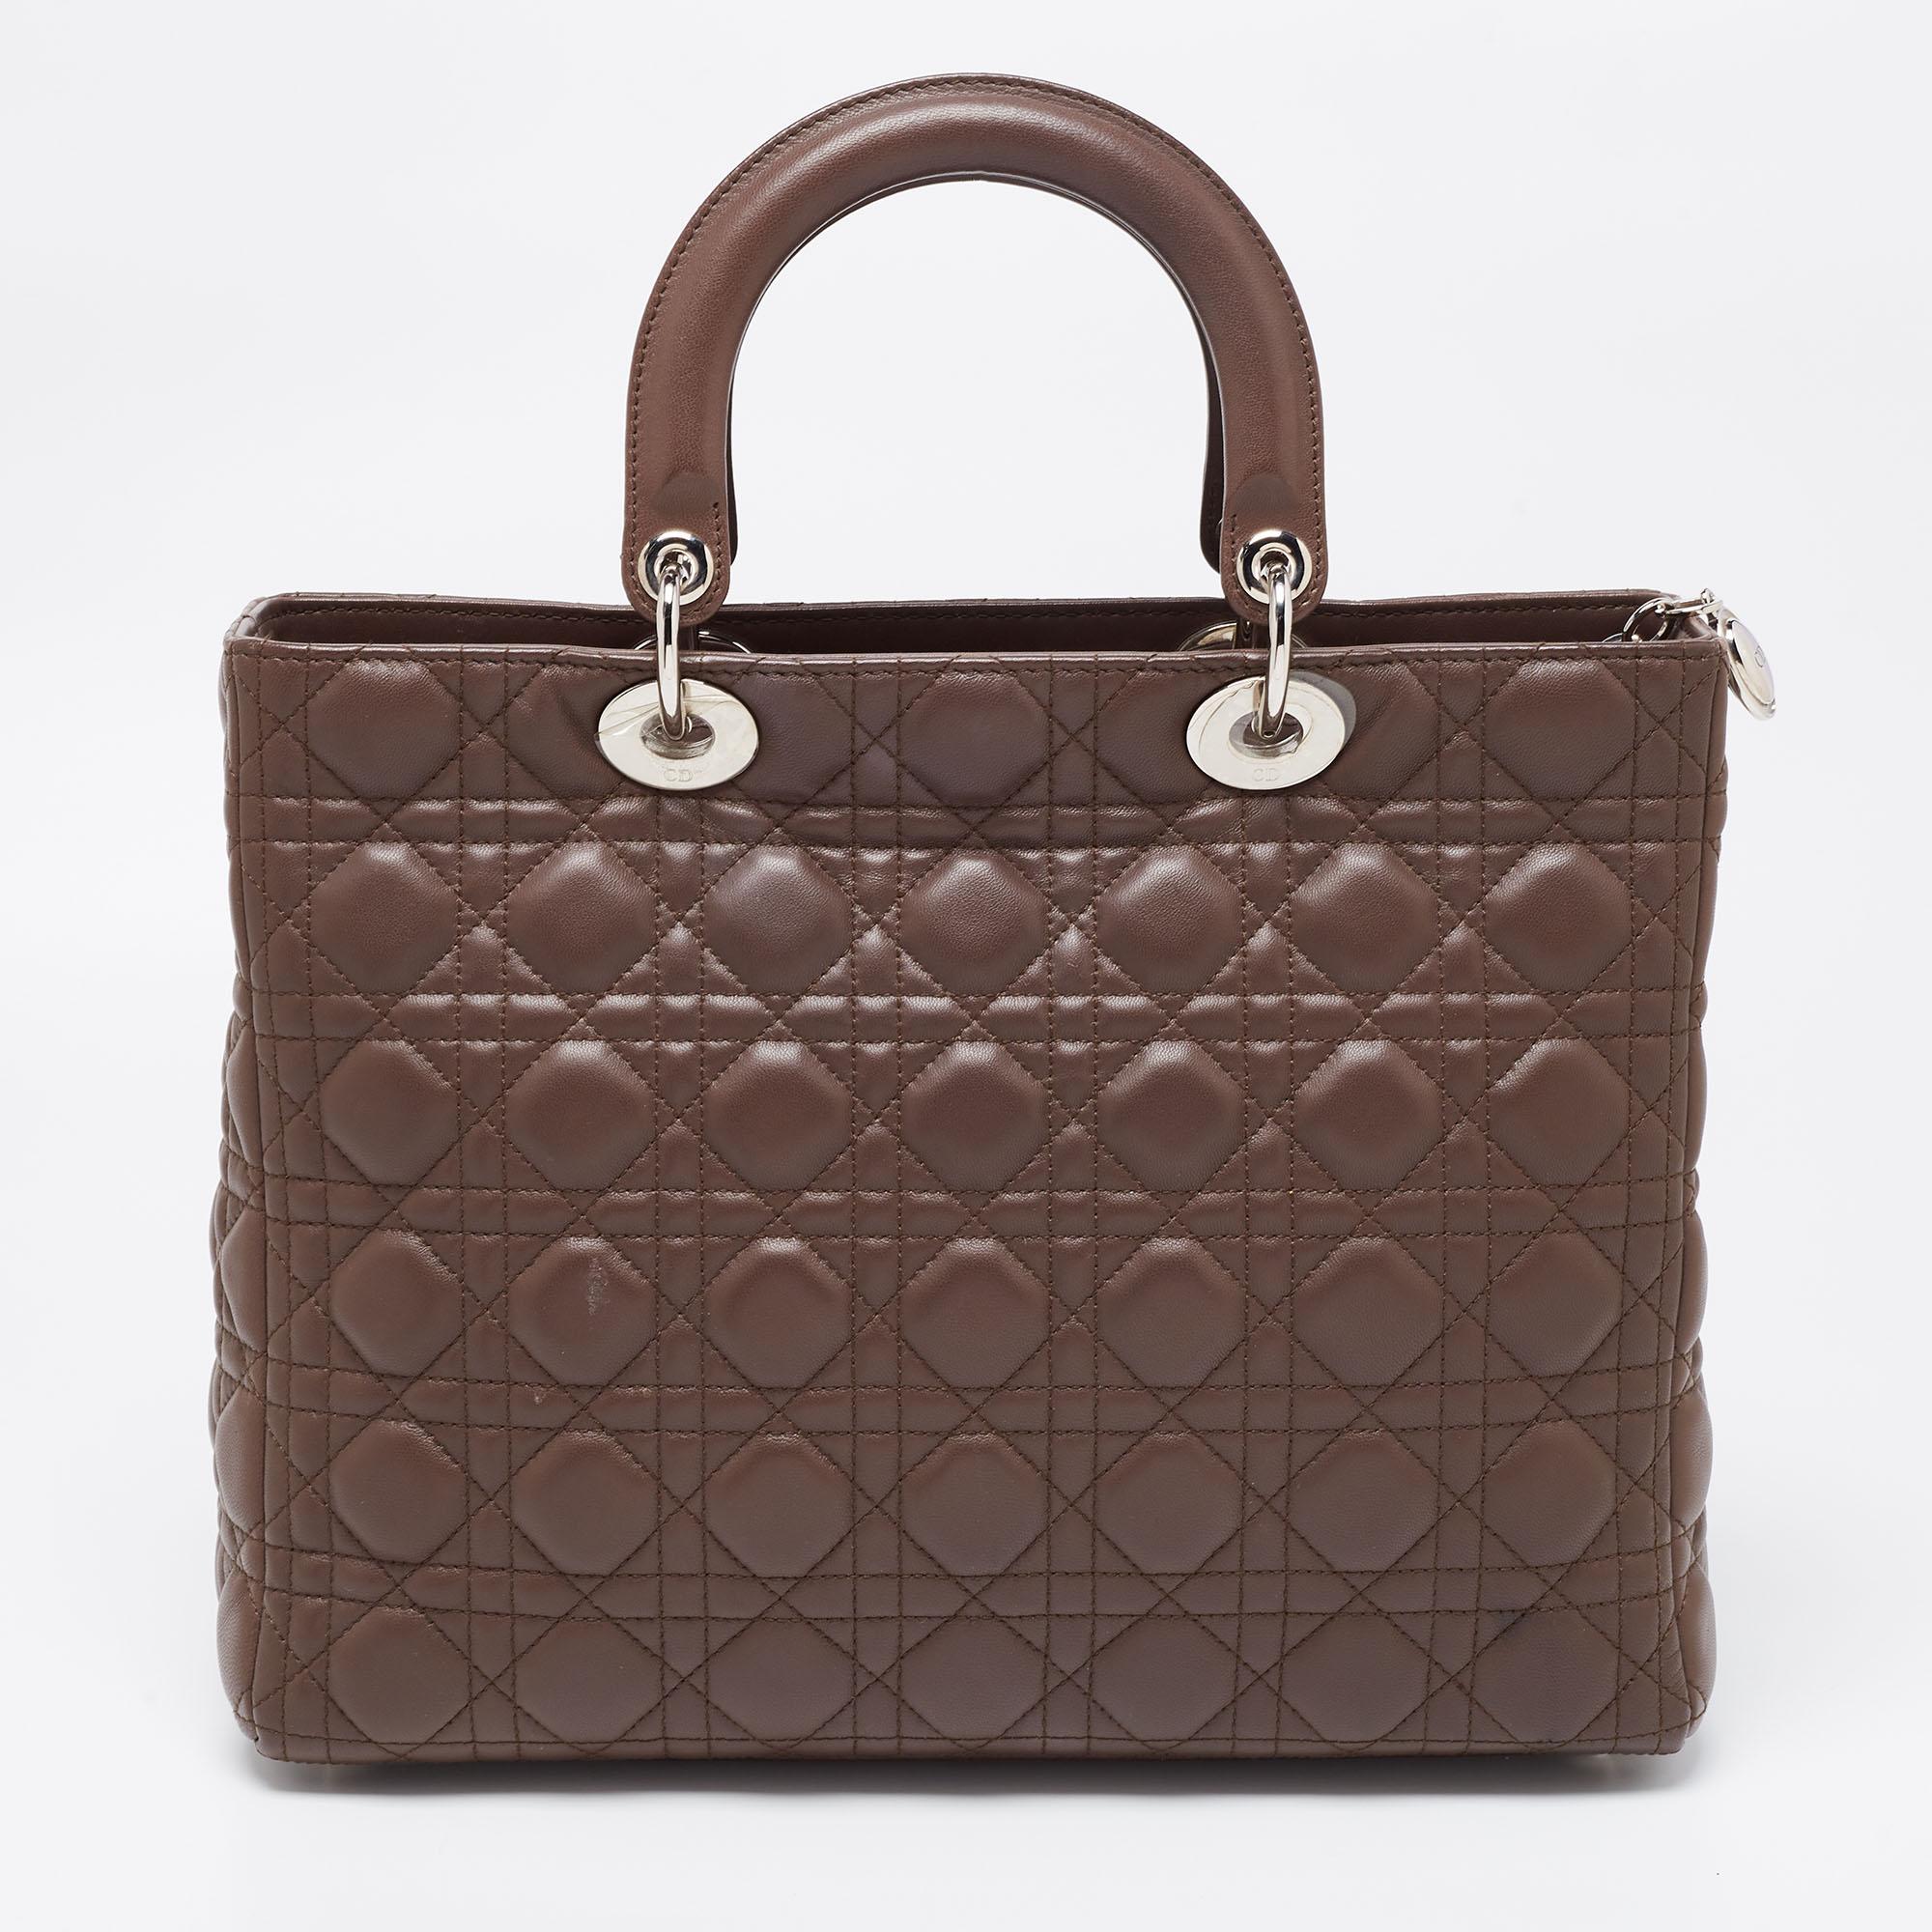 A timeless status and great design mark the Lady Dior tote. It is an iconic bag that people continue to invest in to this day. We have here this large Lady Dior tote crafted from brown Cannage leather. The bag is complete with two top handles, a